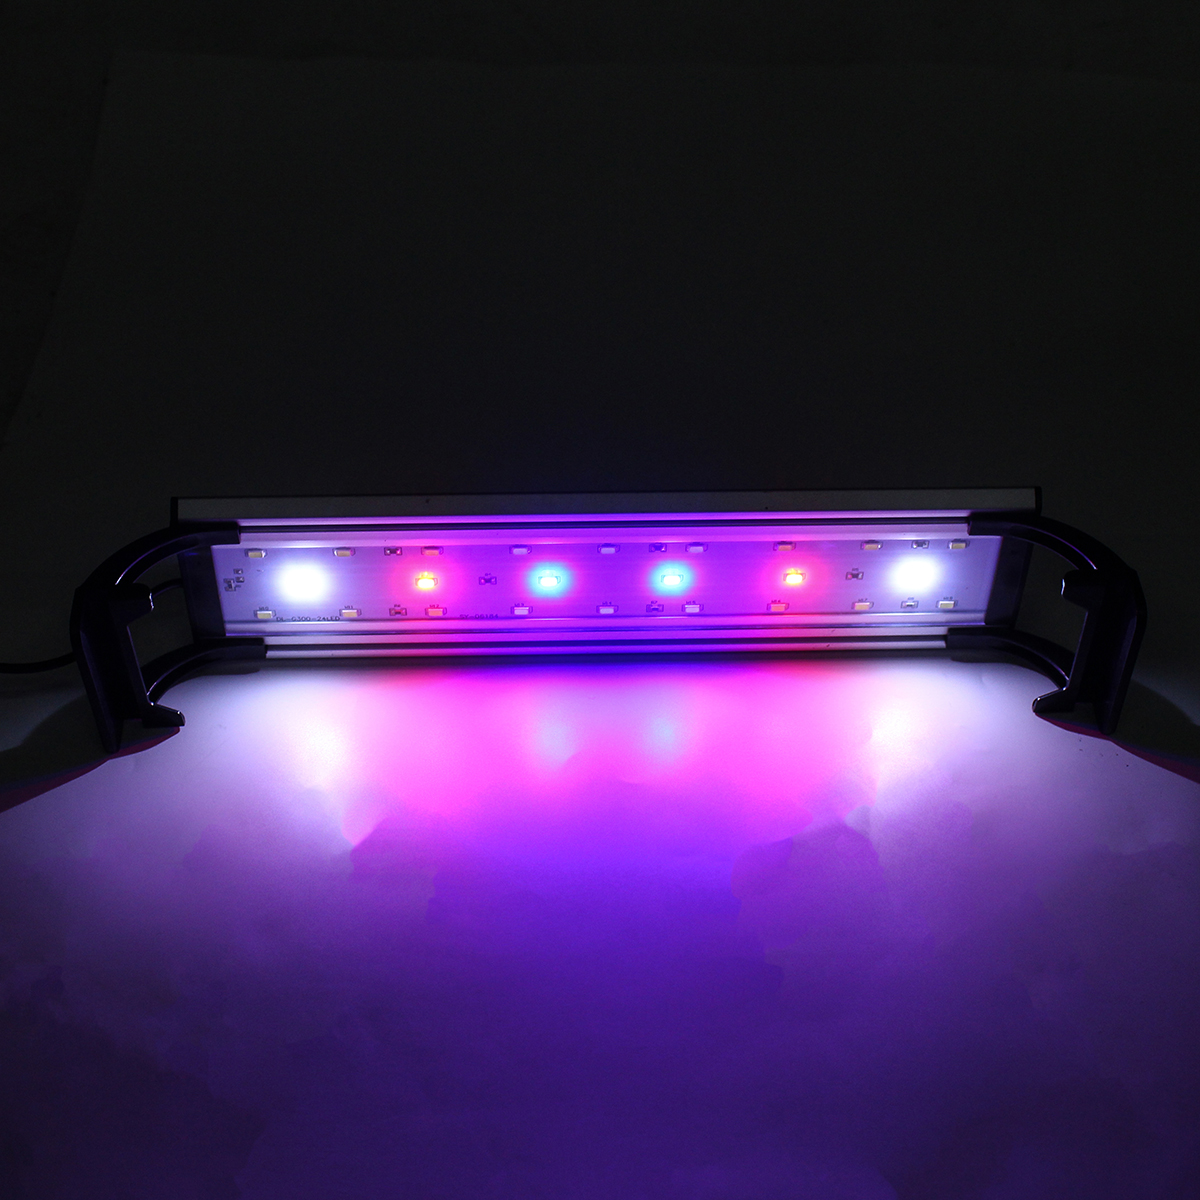 Dimmable--Timer-LED-Fish-Tank-Light-Lamp-Hood-Aquarium-Lighting-with-Extendable-Brackets-for-30CM-Ta-1639937-7